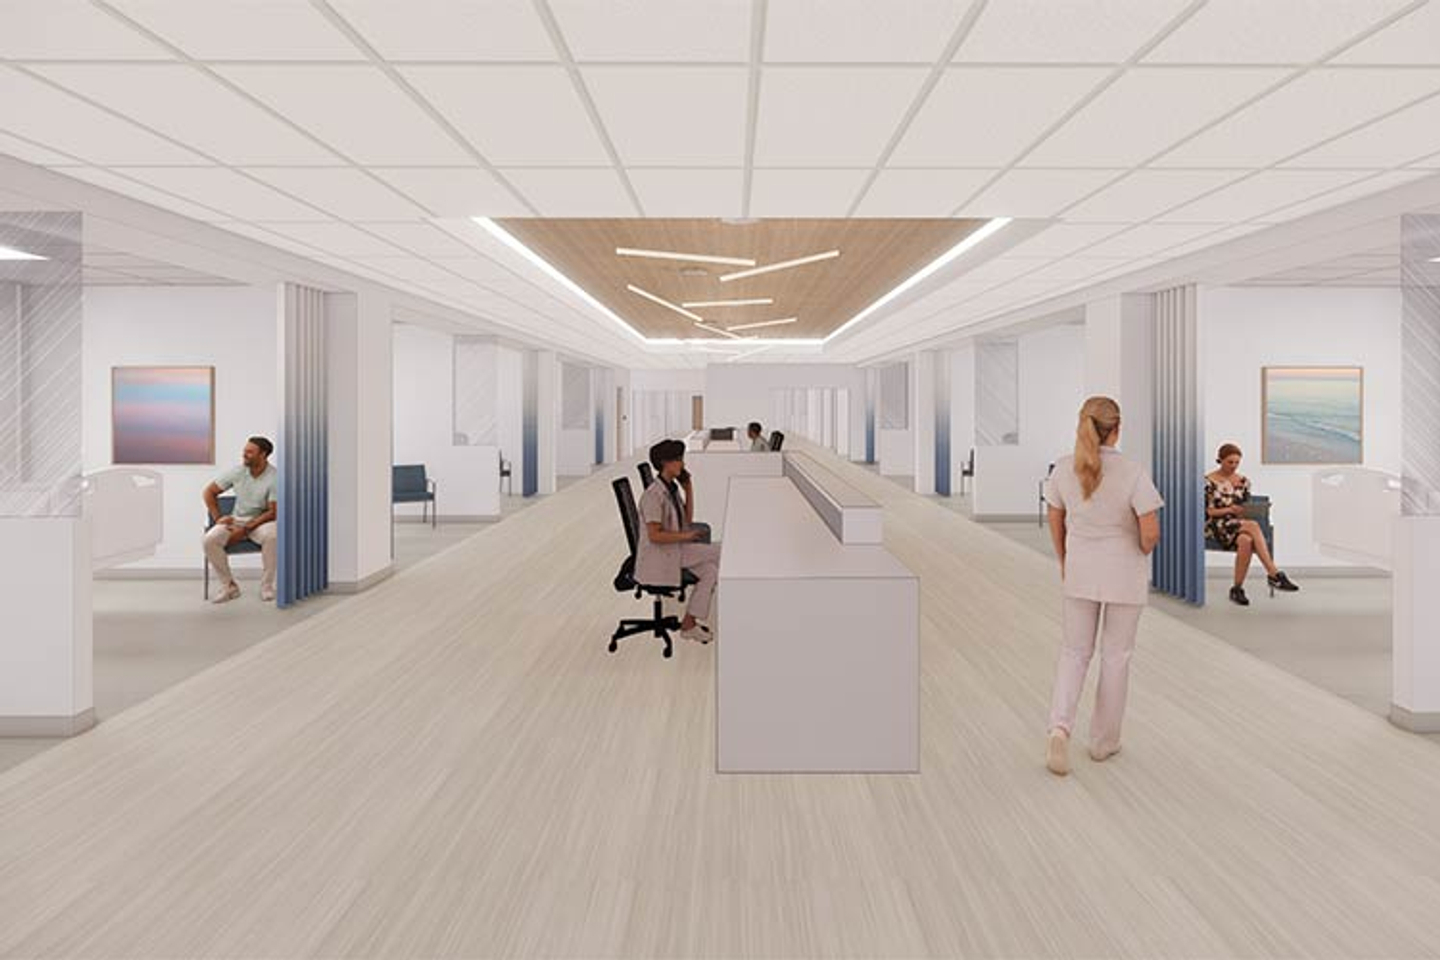 Artistic rendering of the Hospital for Endocrine Surgery interior hallway with patient care rooms and a central nurse station.